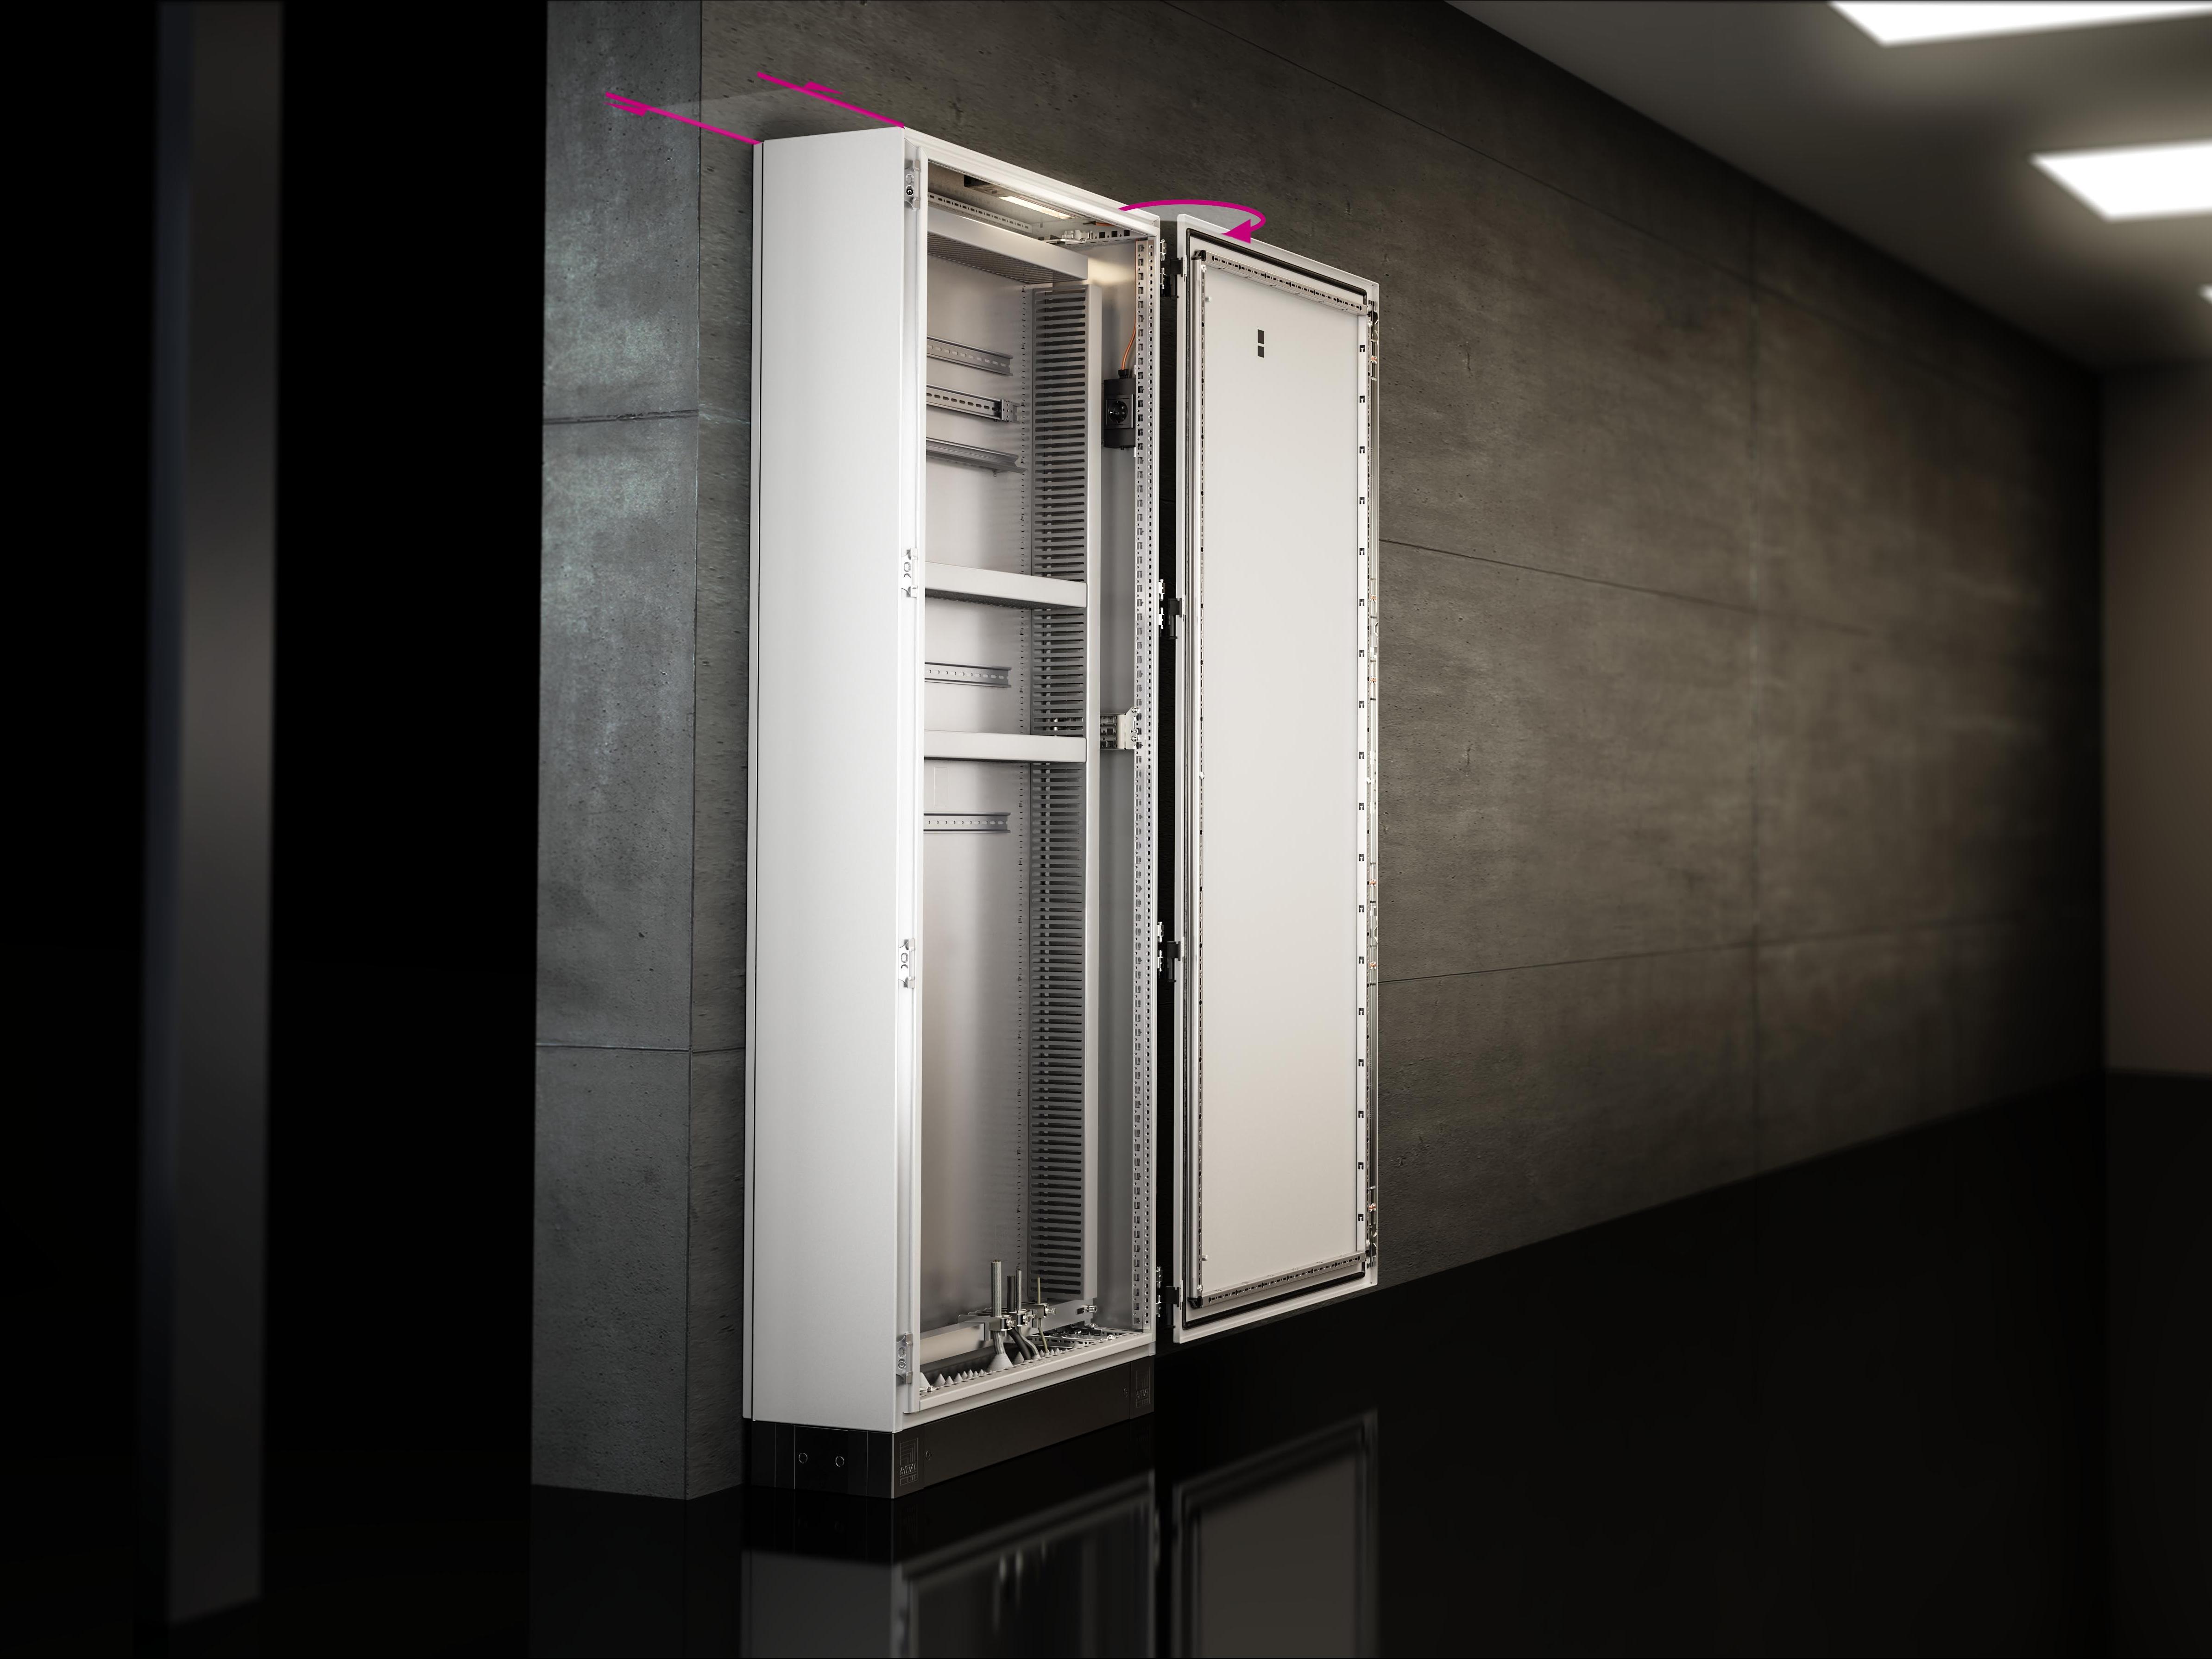 Stand-alone enclosures ‘offer greater simplicity’